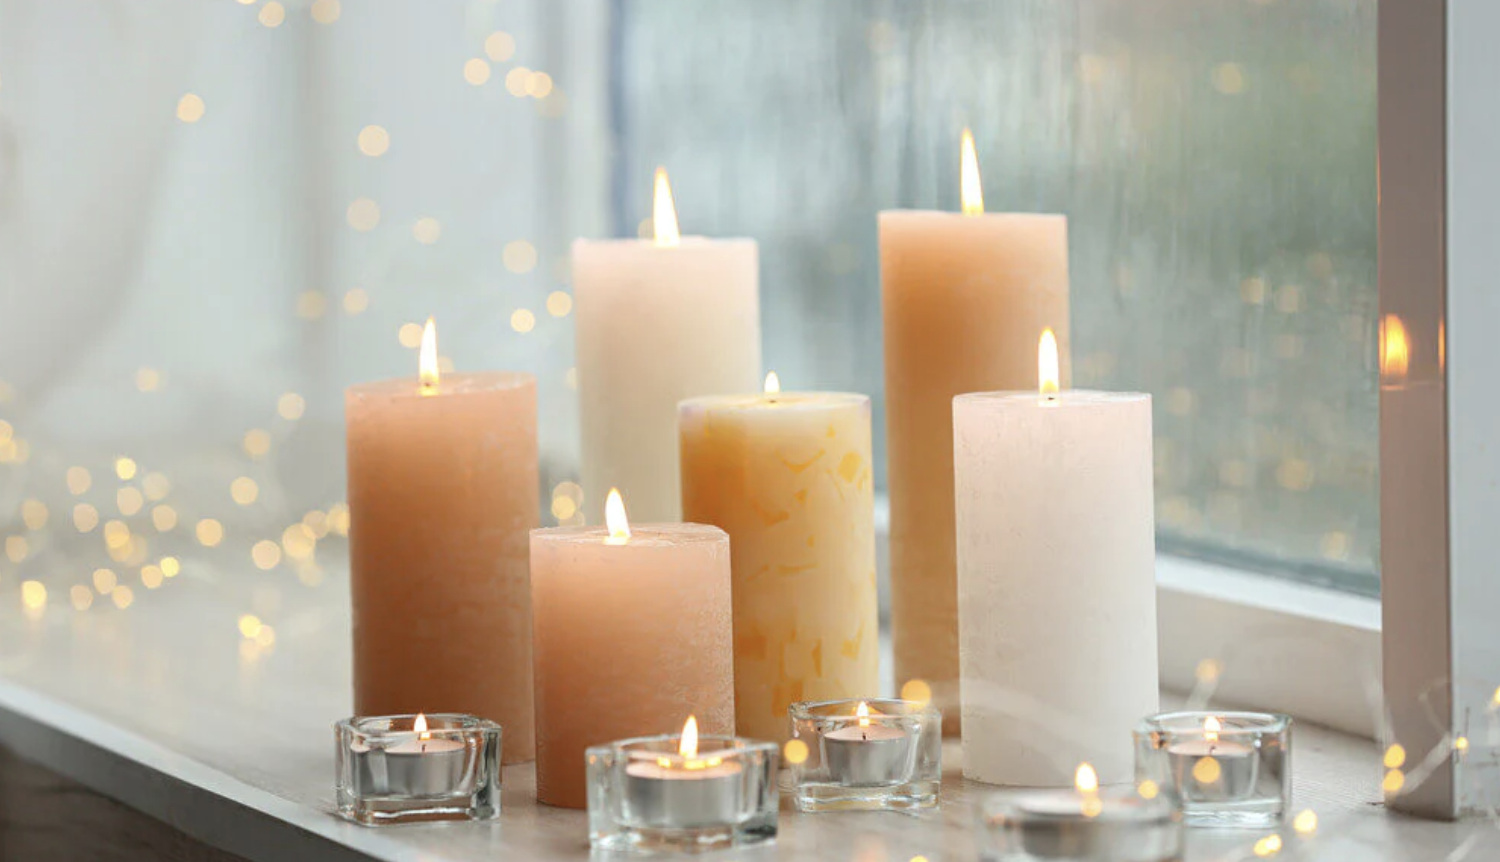 Image of 6 tall orange and white lit candles and 5 smaller tea light candles in front of a window.